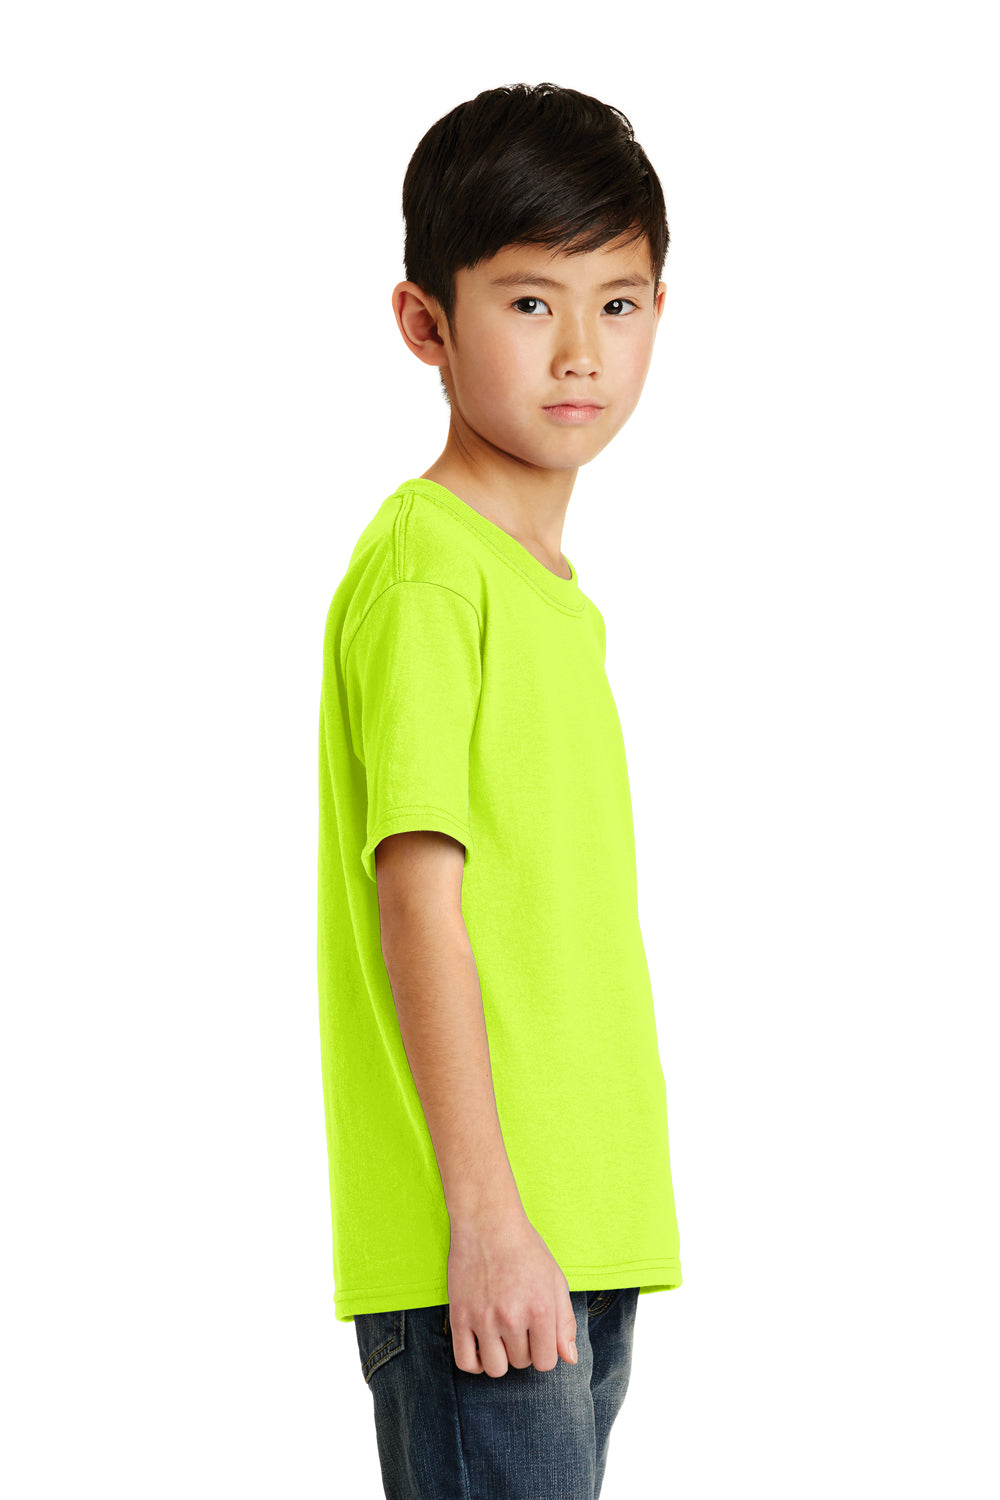 Port & Company PC55Y Youth Core Short Sleeve Crewneck T-Shirt Safety Green Side